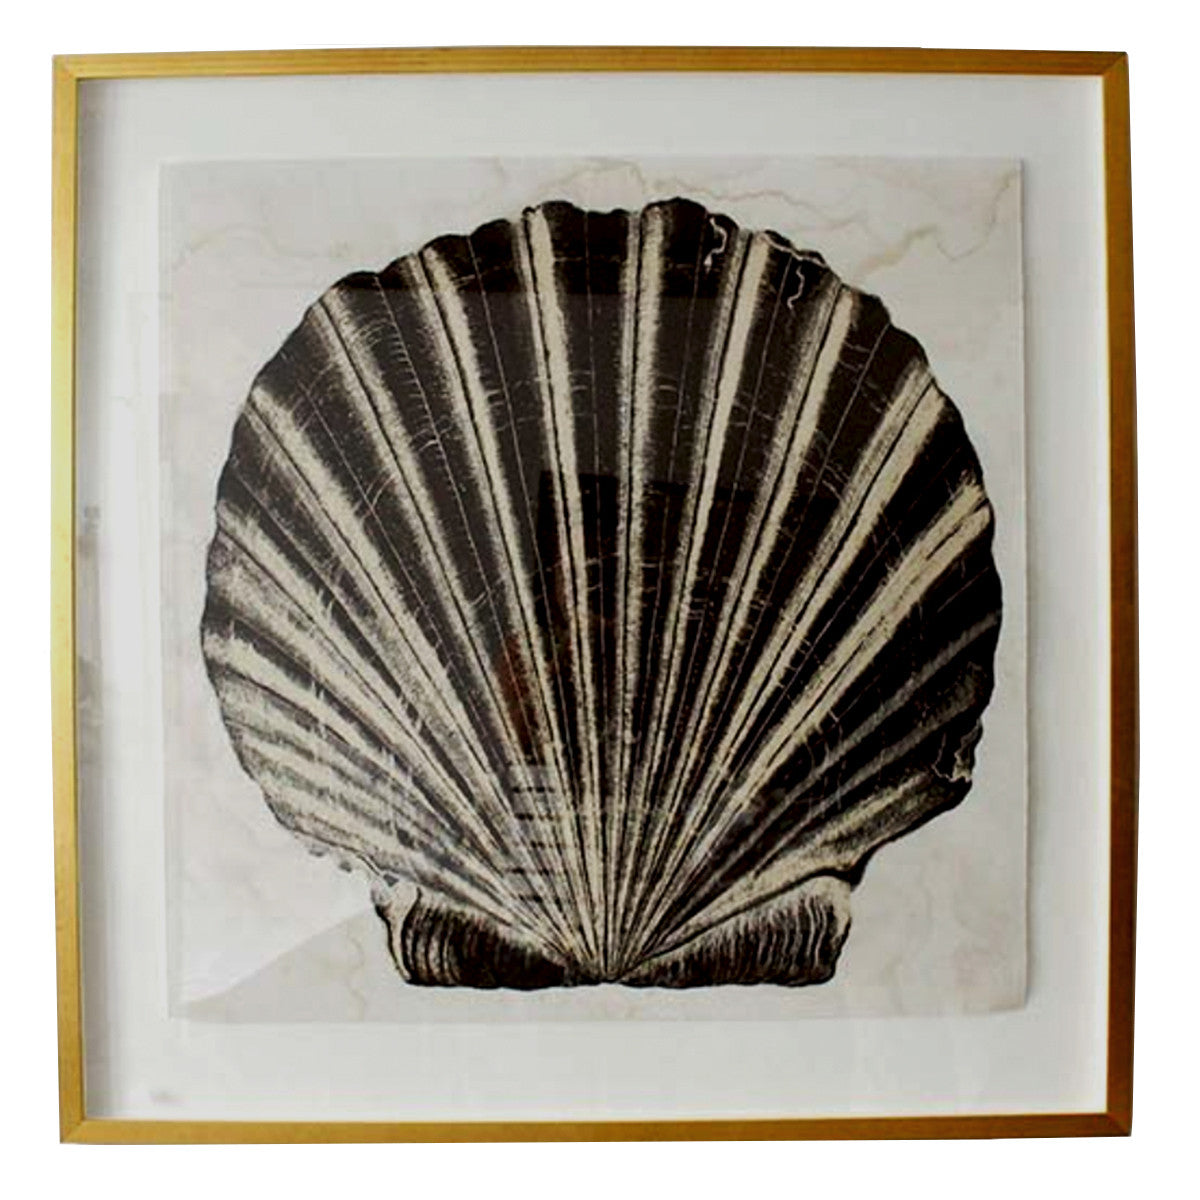 Framed in a gold gilt frame, this reproduction print of an early 20th century shell, adds a graphic note to any beach or cottage space.